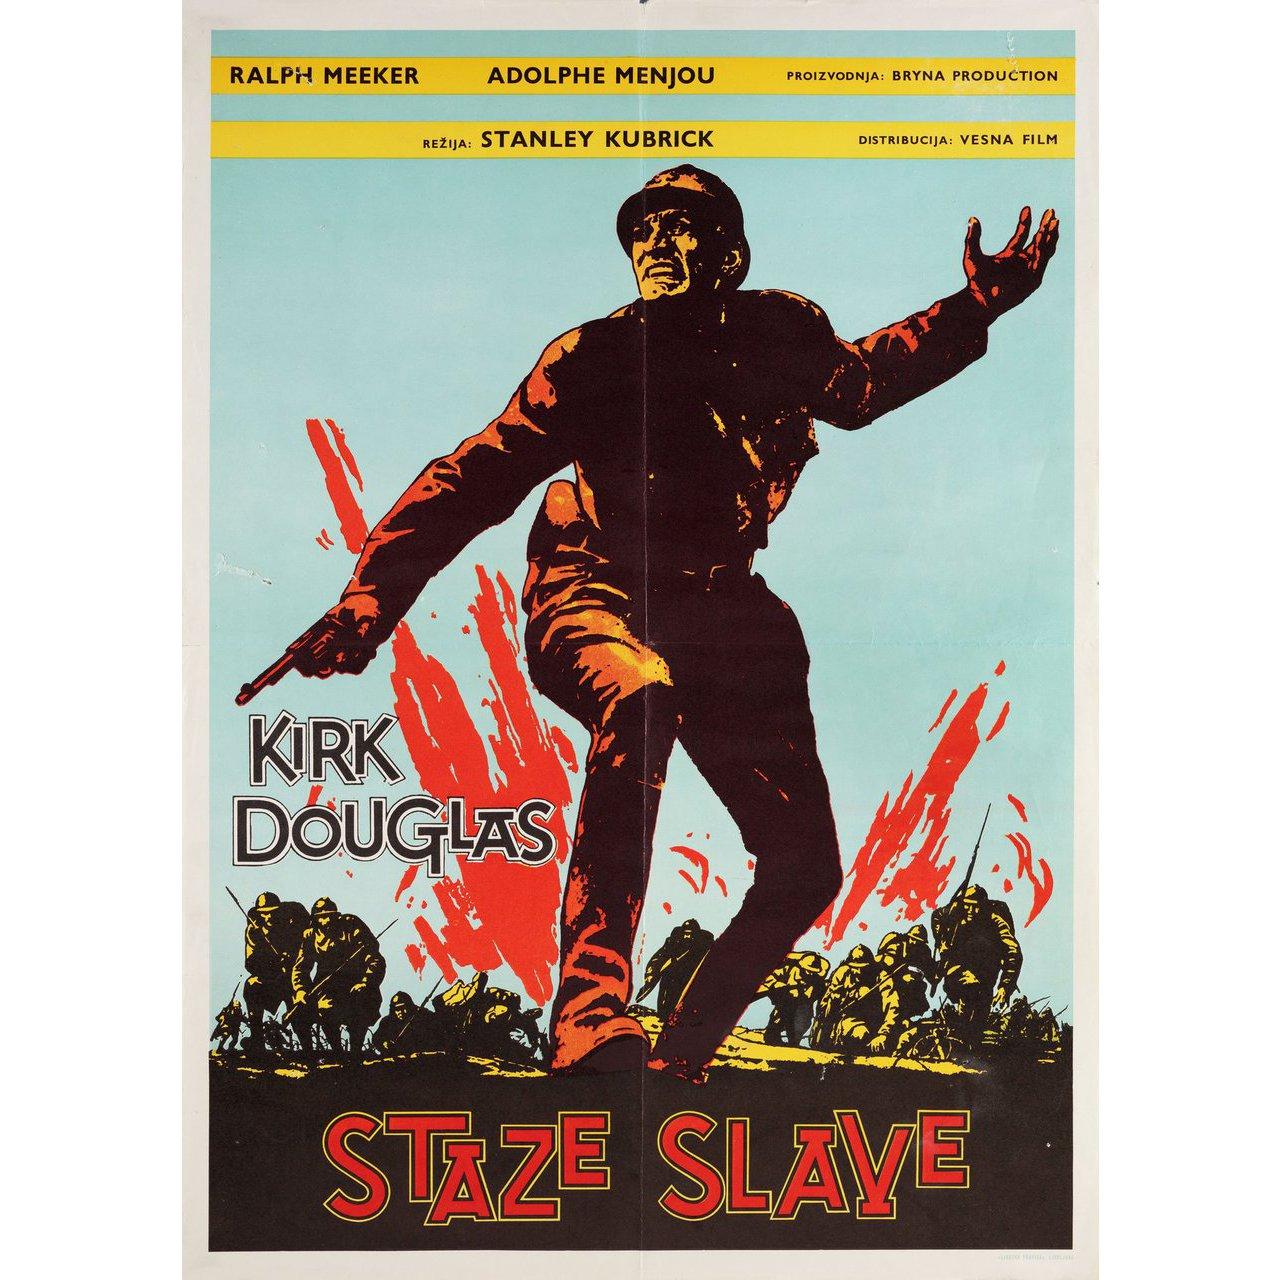 Original 1960s Yugoslav B2 poster for the first Yugoslav theatrical release of the 1957 film Paths of Glory directed by Stanley Kubrick with Kirk Douglas / Ralph Meeker / Adolphe Menjou / George Macready. Good-Very Good condition, folded w/ paper